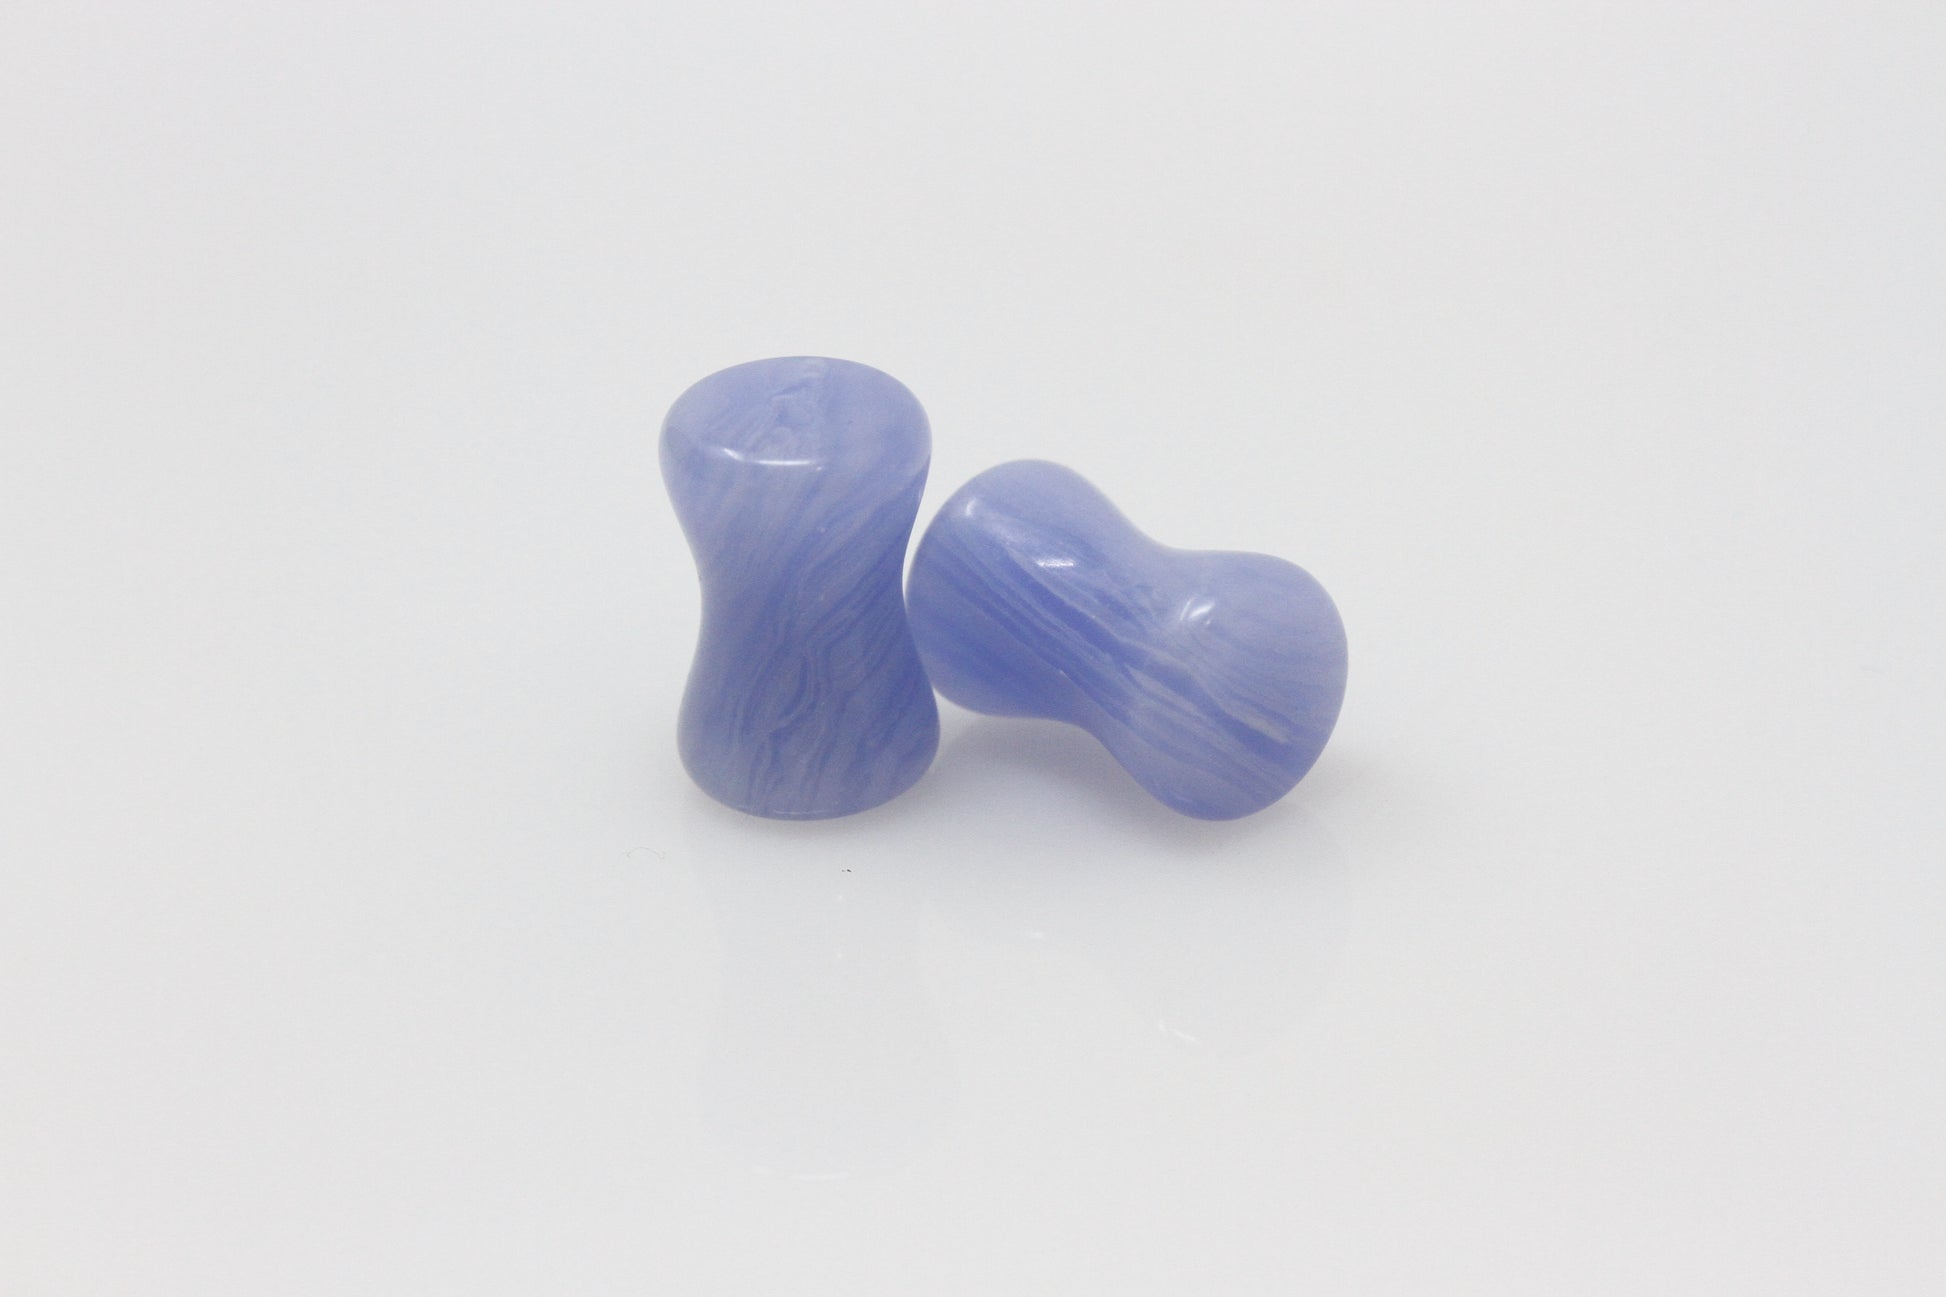 Blue Lace Agate Plugs - WB Pair Small